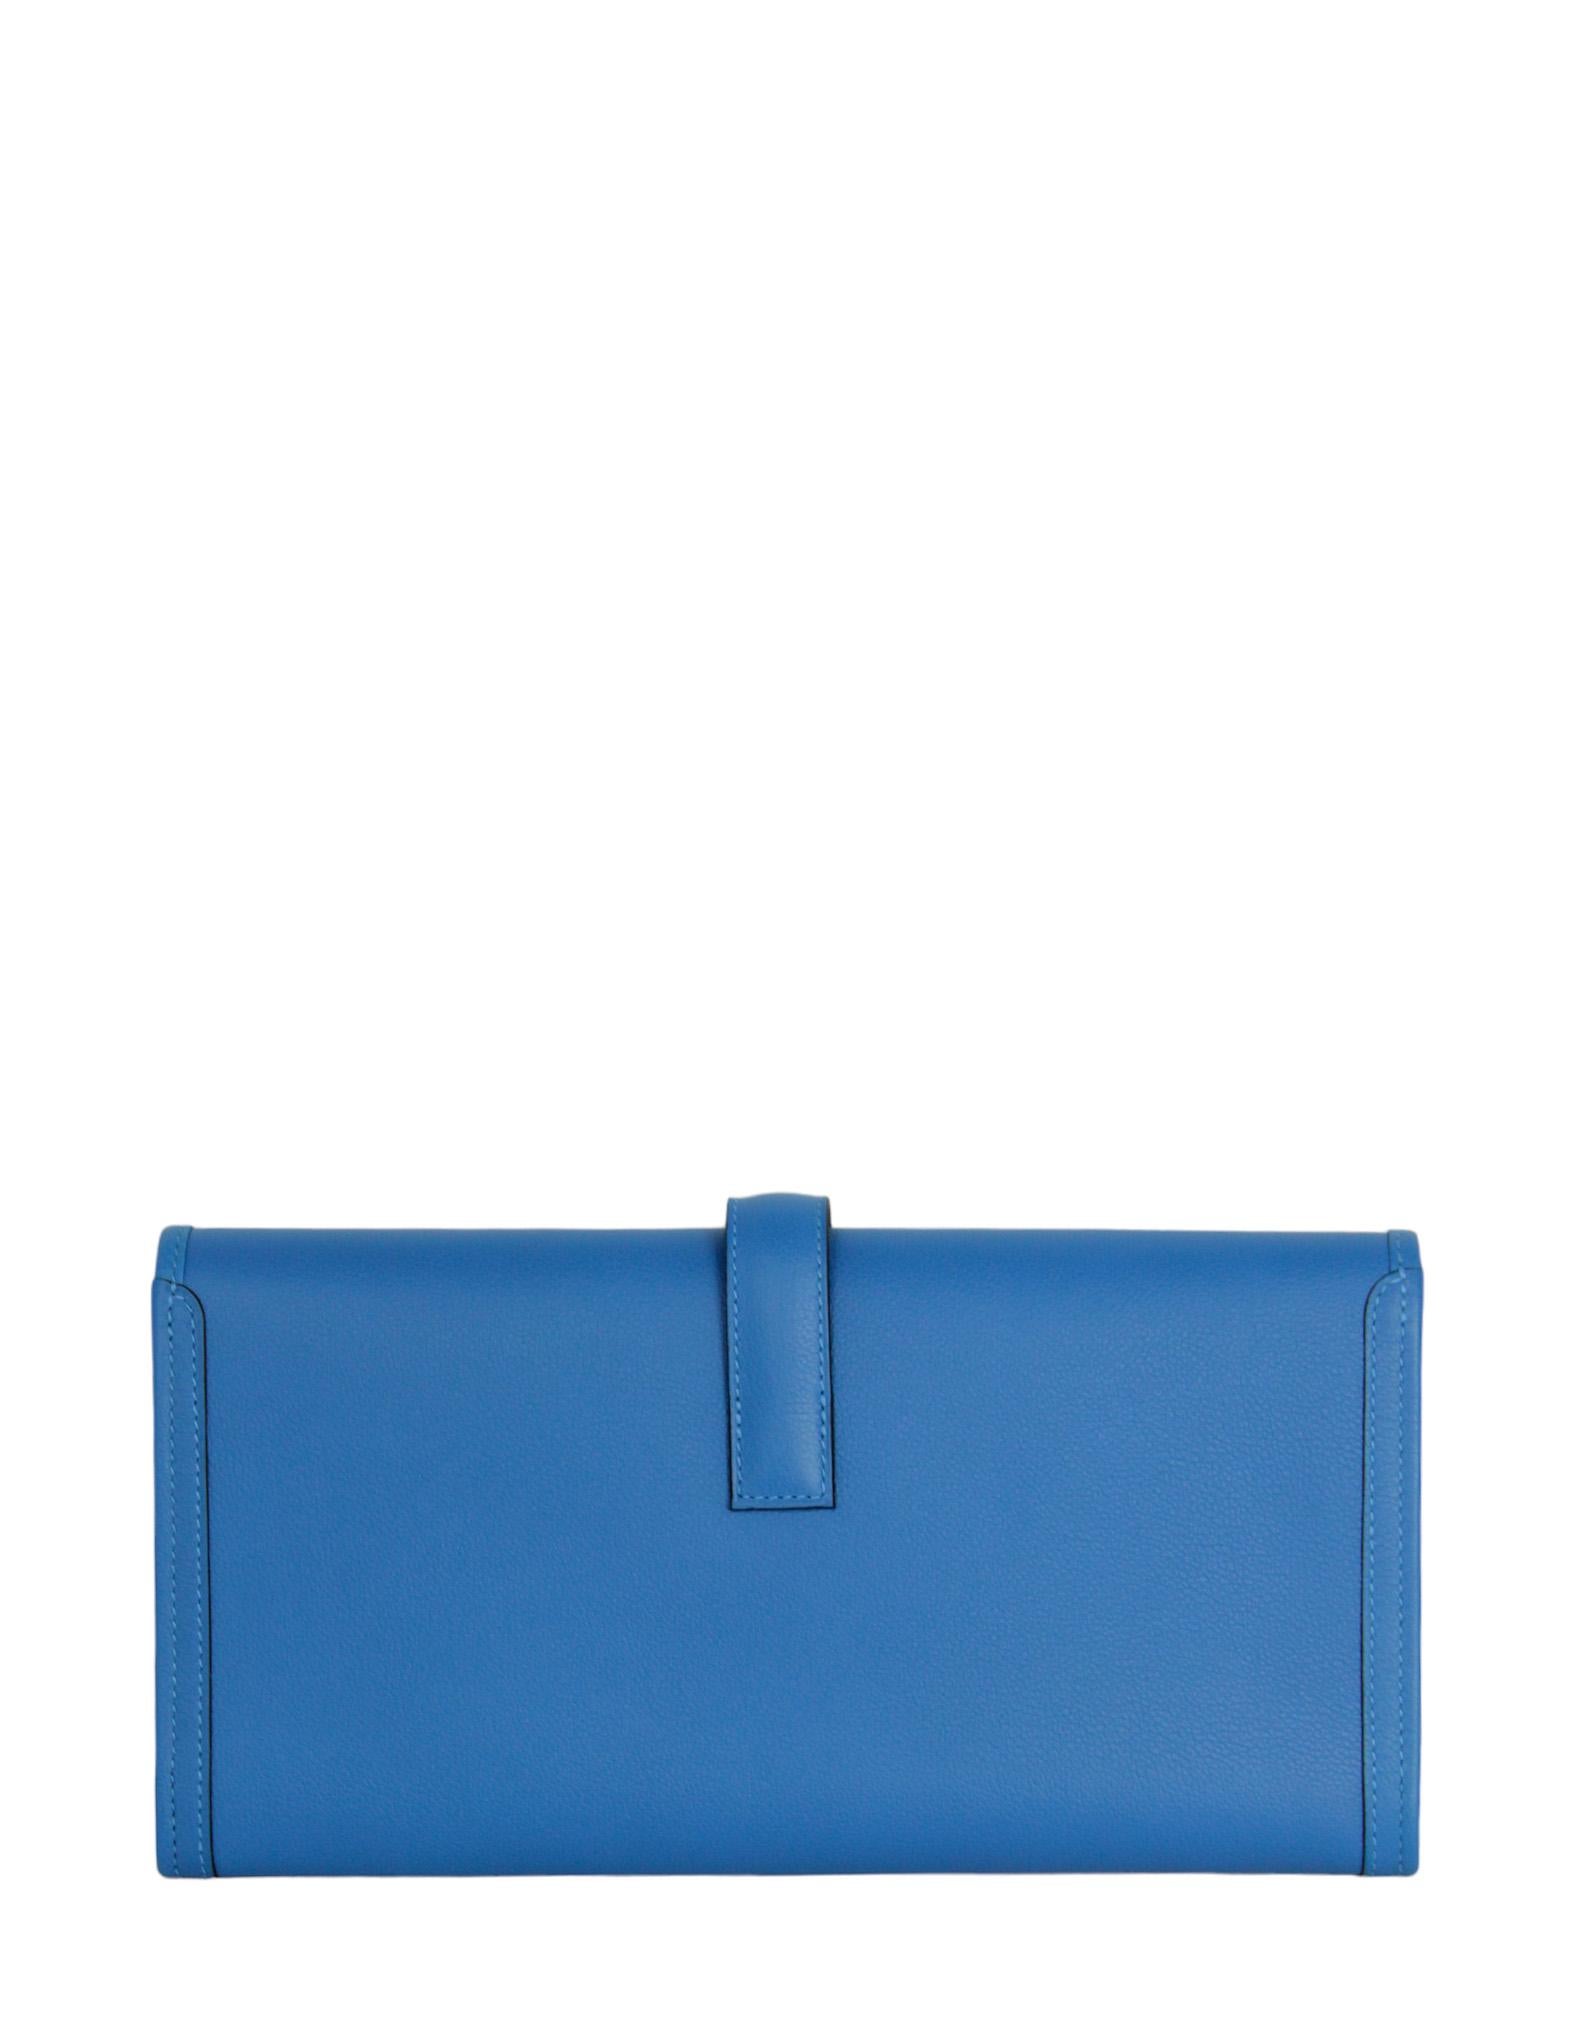 Hermes Blue Swift Leather H Jige Elan Clutch Bag In Excellent Condition For Sale In New York, NY